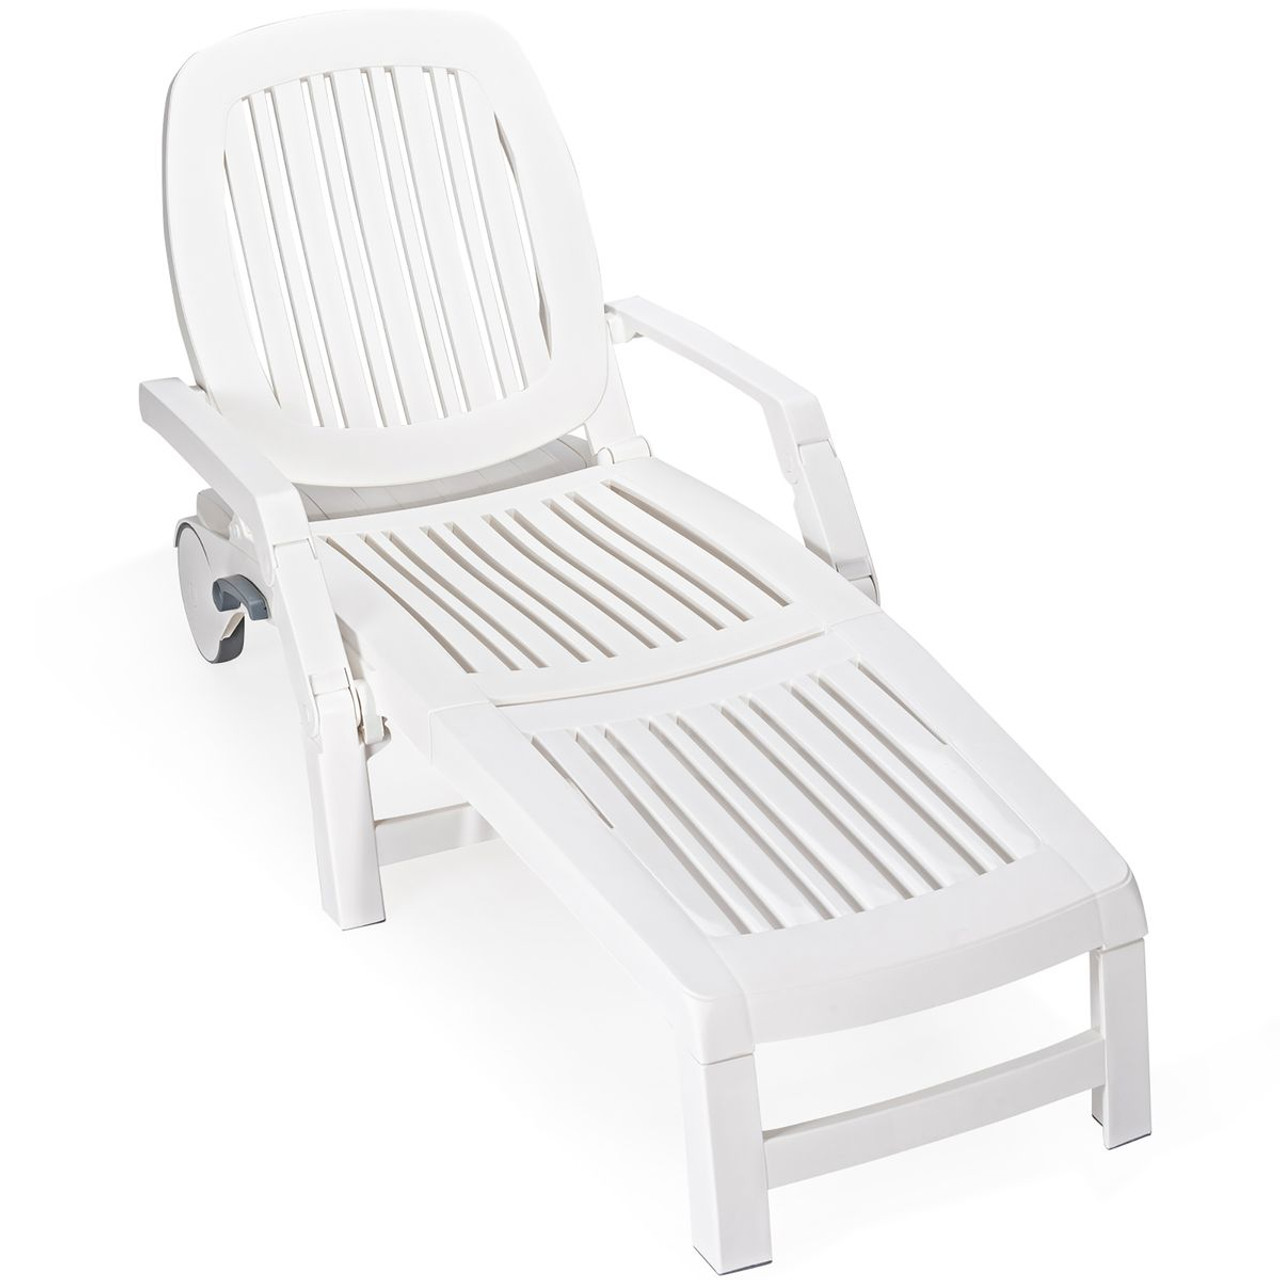 Costway Patio Adjustable Reclining Sunlounger  product image